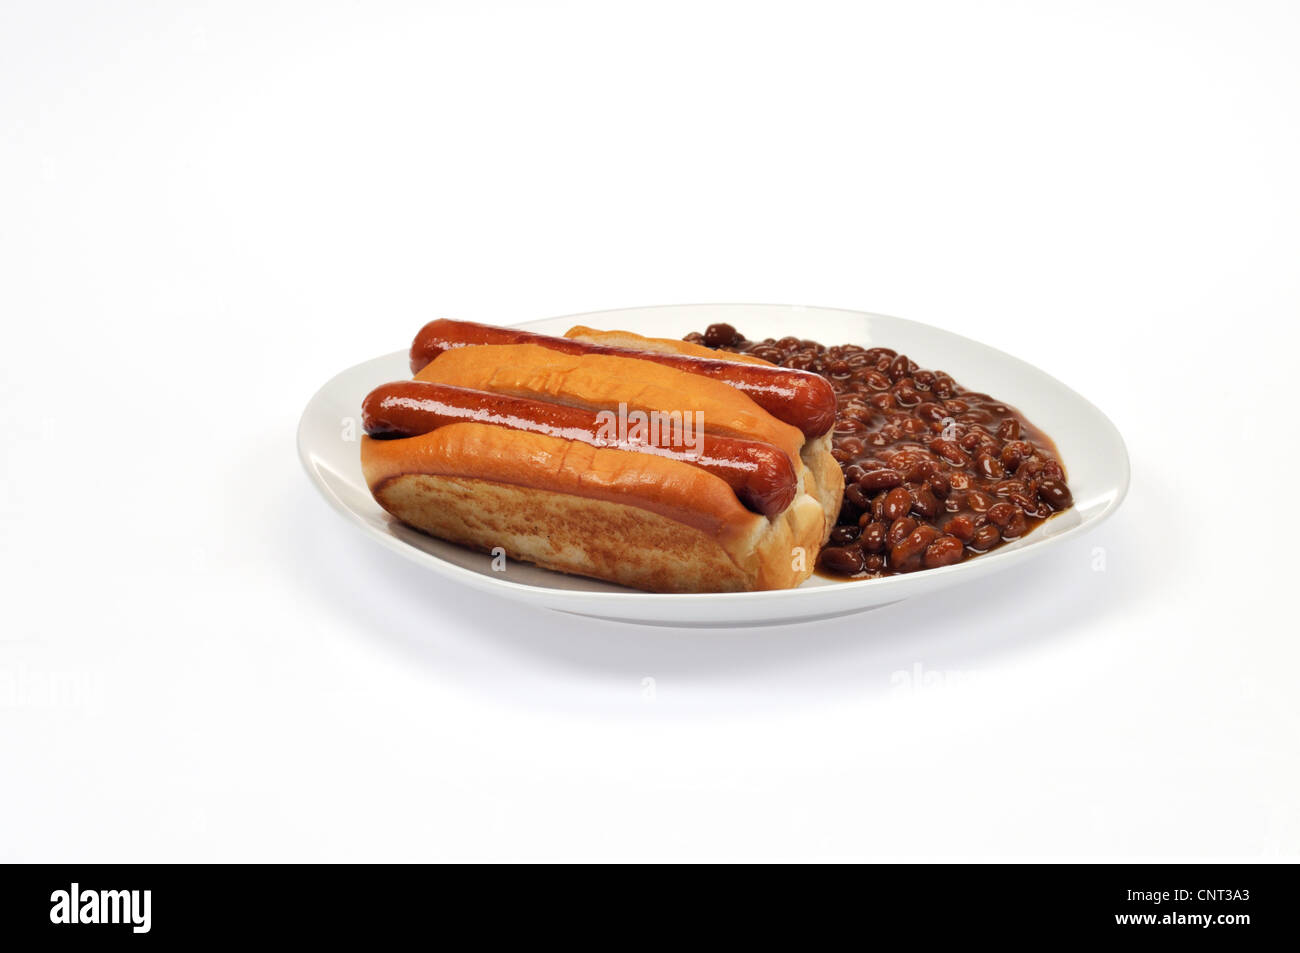 Hot dogs and Boston baked beans Stock Photo